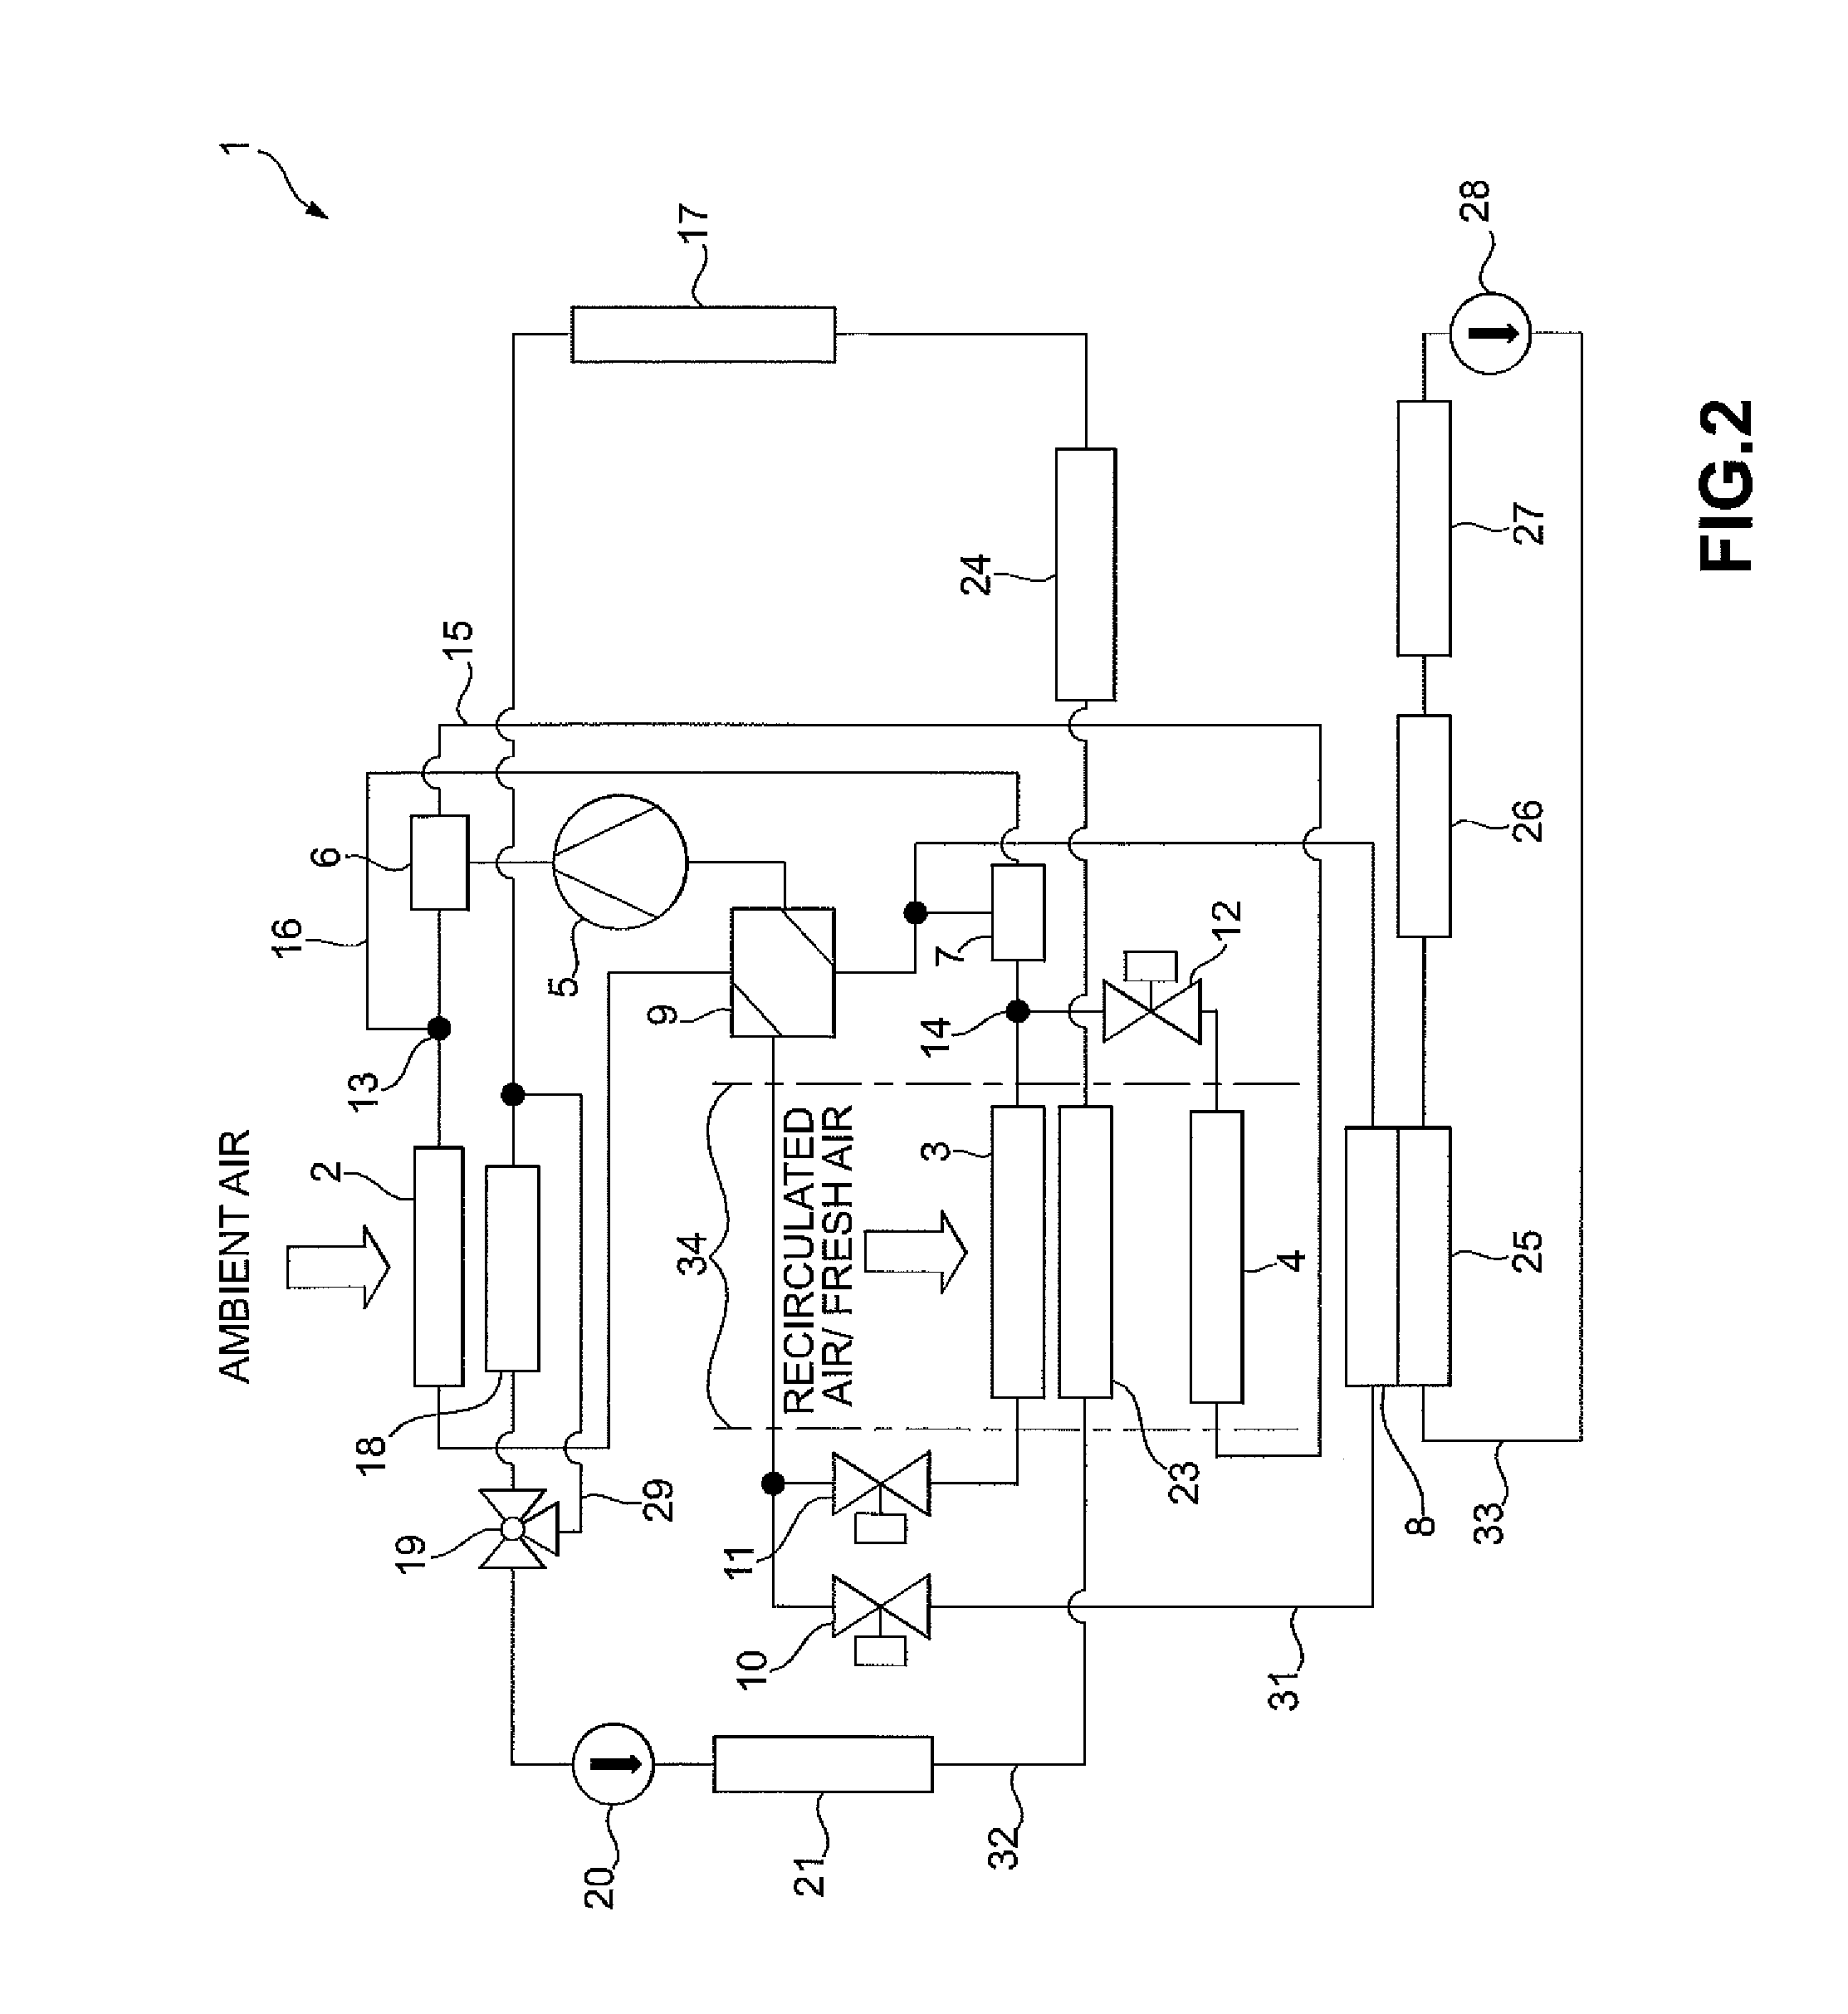 Method for operation of an HVAC system